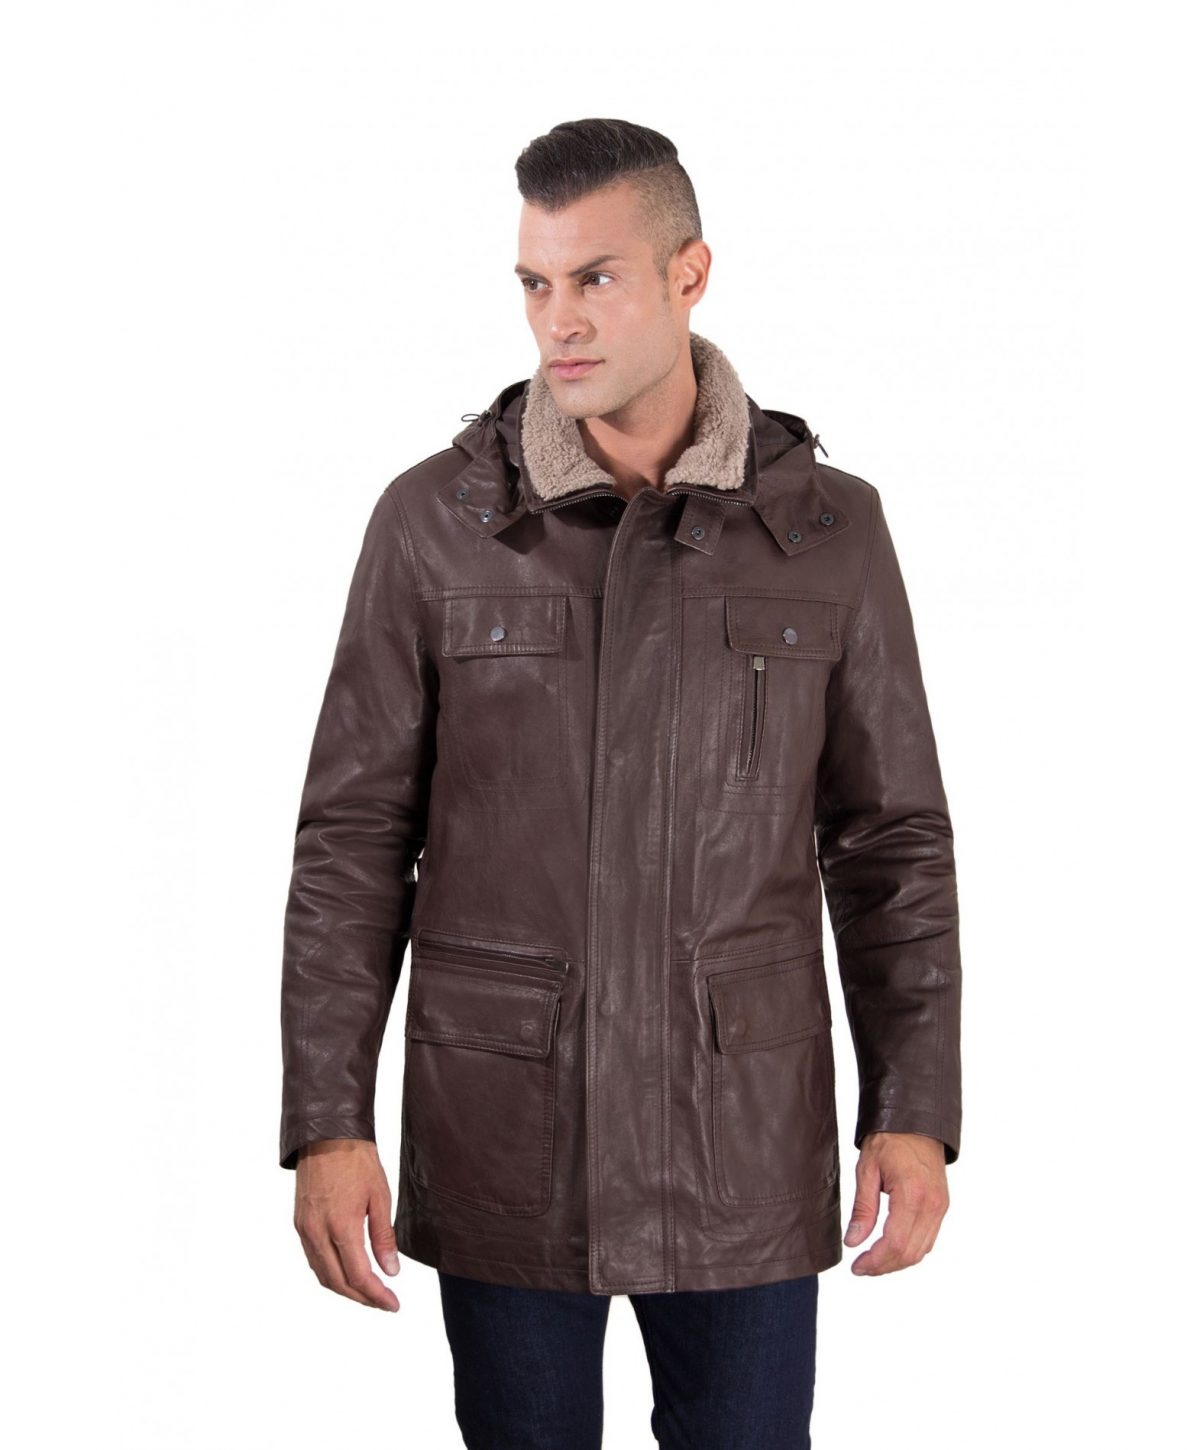 men-s-long-leather-coat-genuine-soft-leather-5-pockets-detachable-hood-buttons-and-zip-closing-dark-brown-color-mod-vittorio